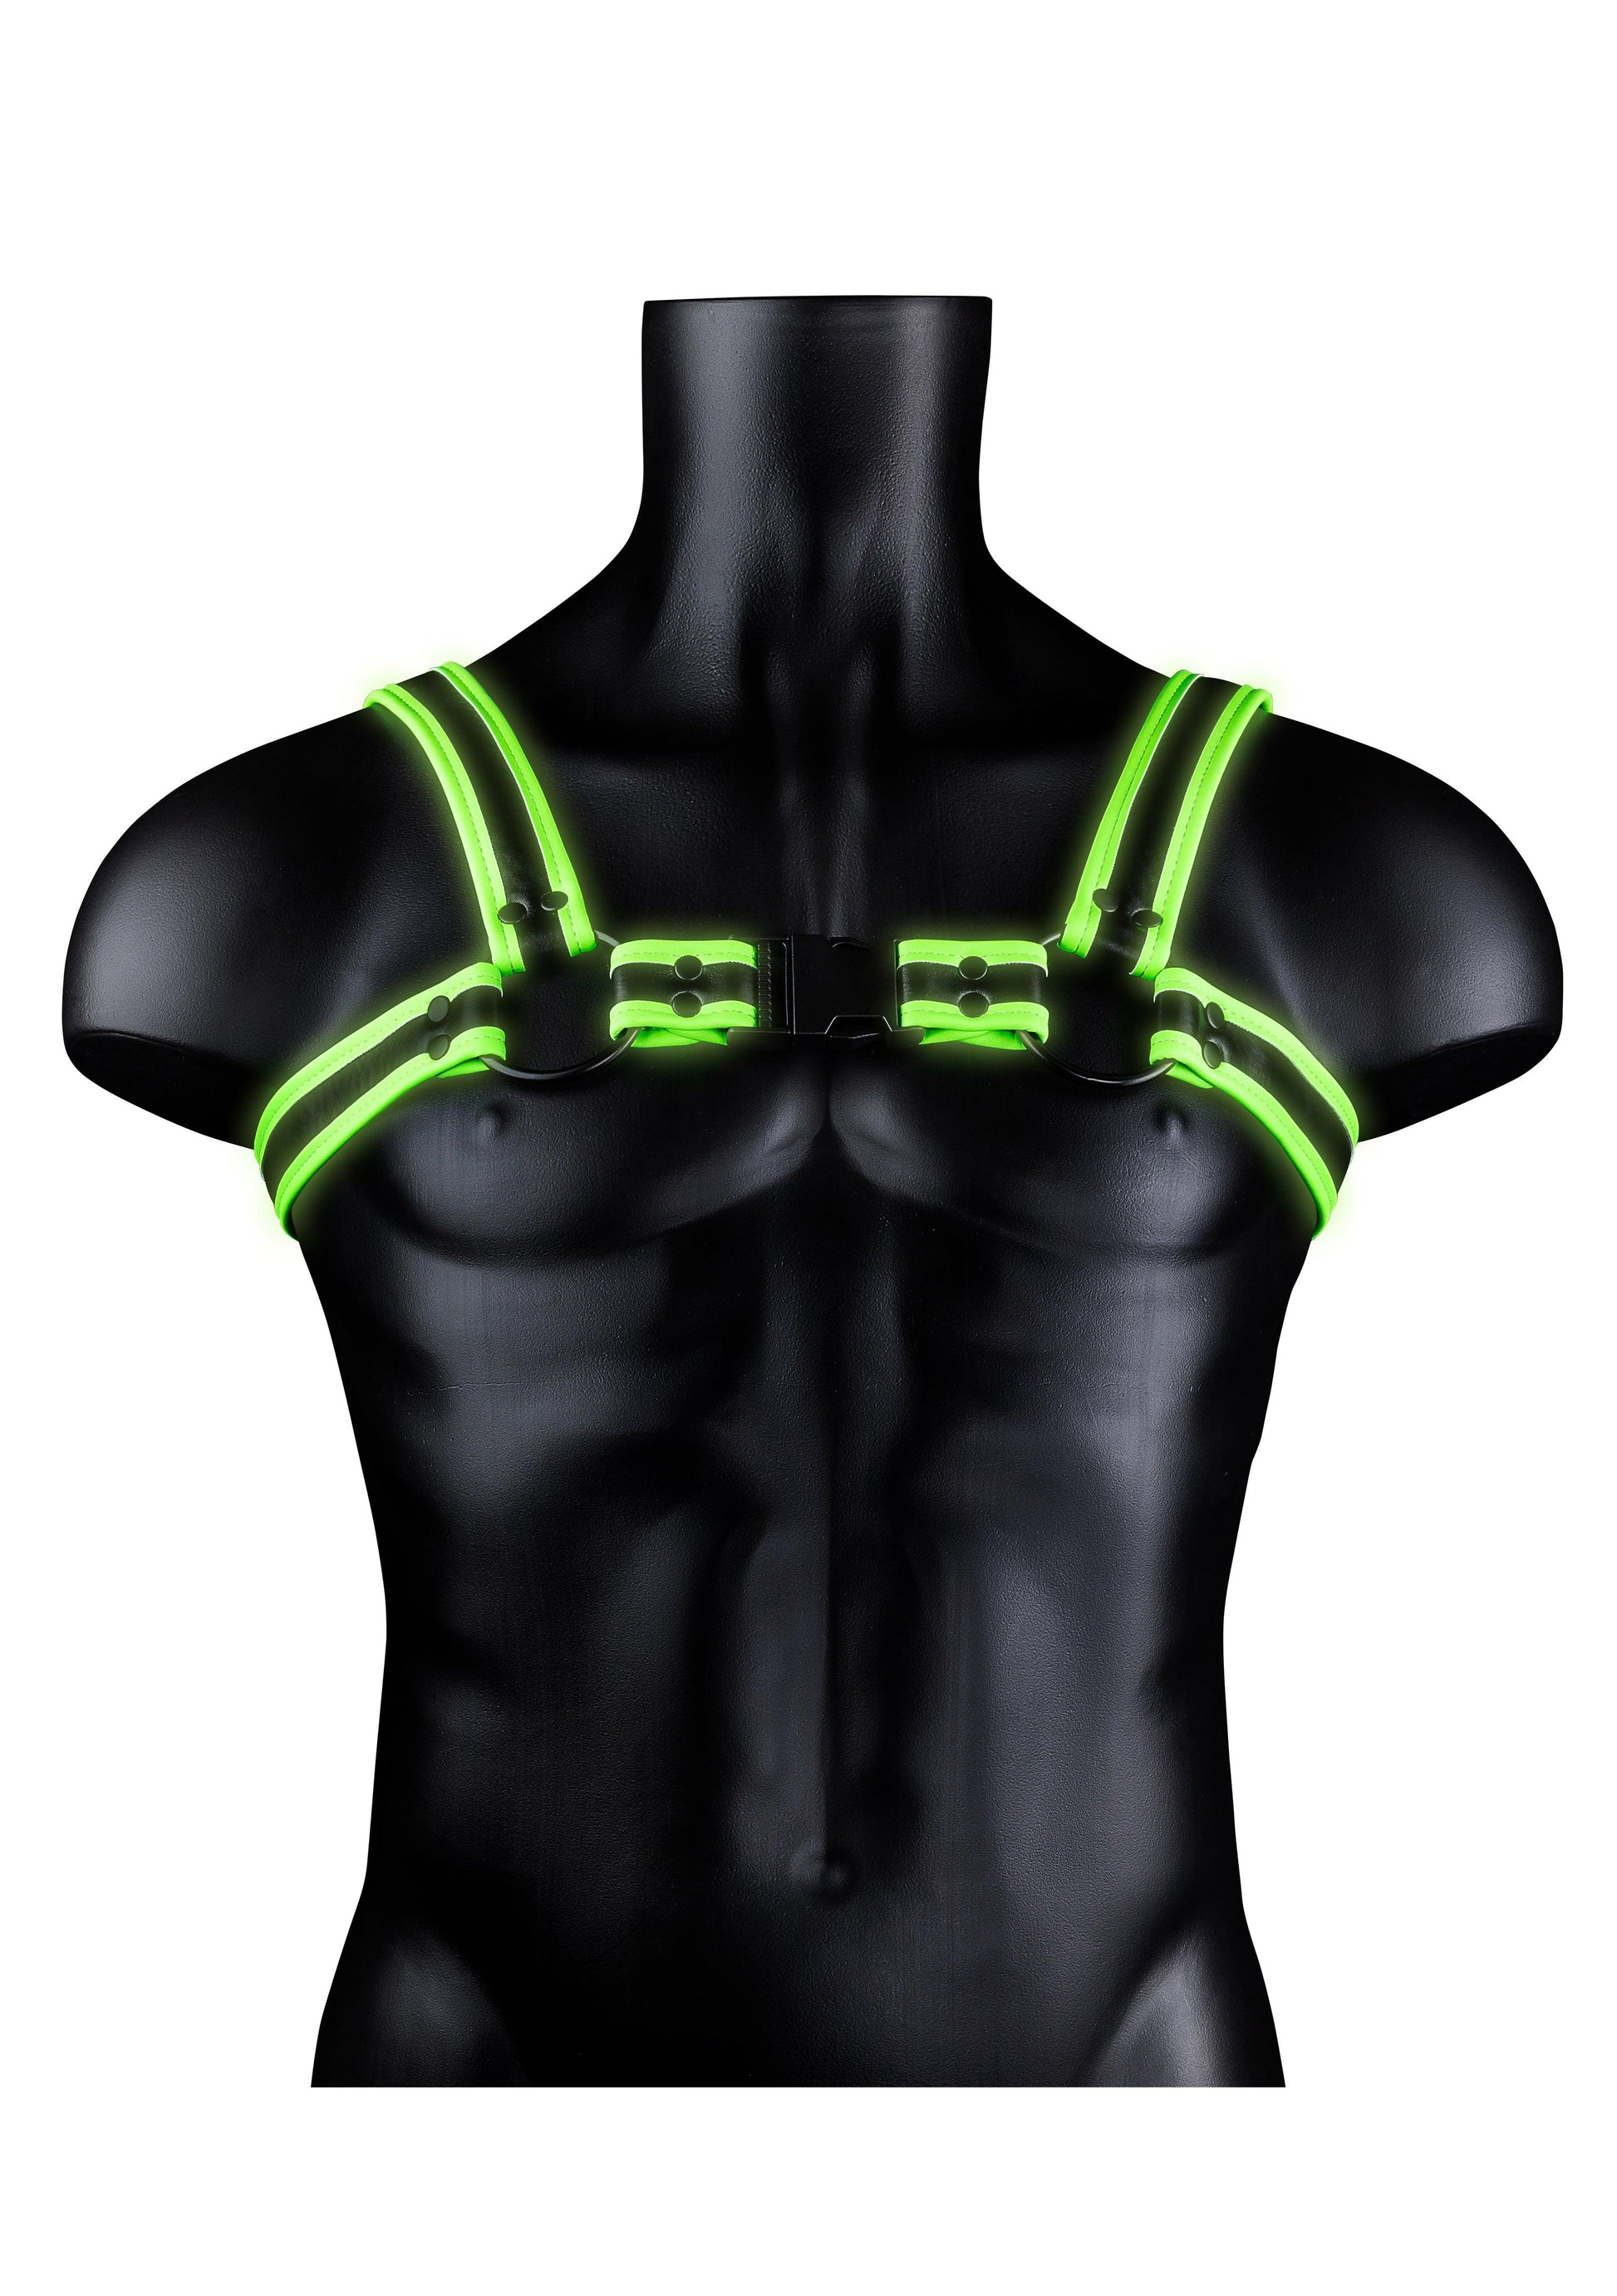 Bonded Leather Buckle Harness - Small/medium - Glow in the Dark - My Sex Toy Hub